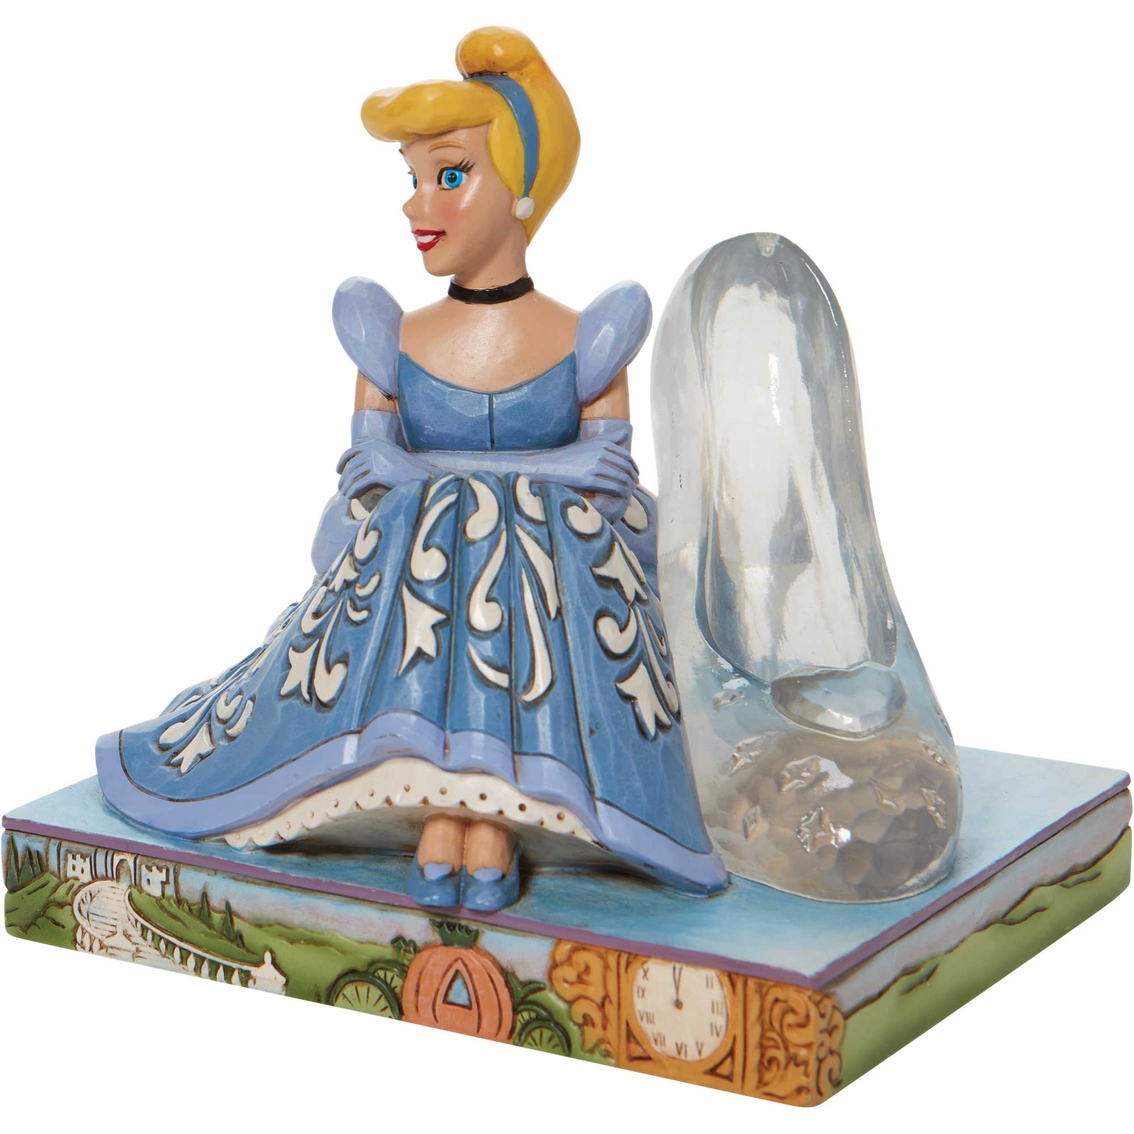 Disney Traditions Cinderella and Glass Slipper - Image 3 of 4